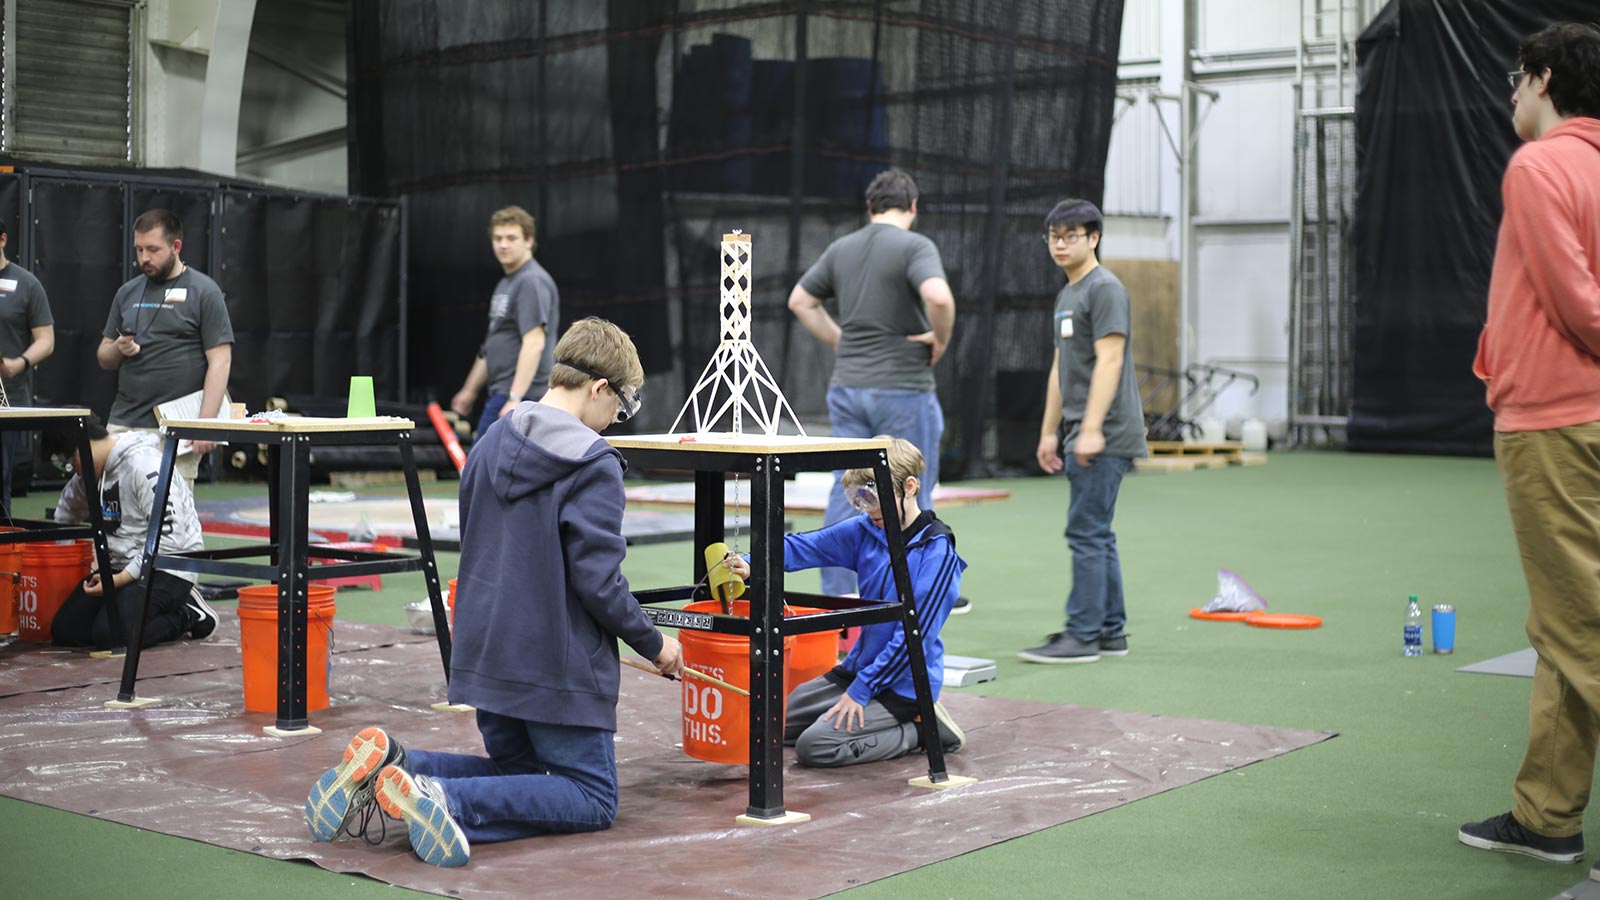 Science olympiad participants competing in an event